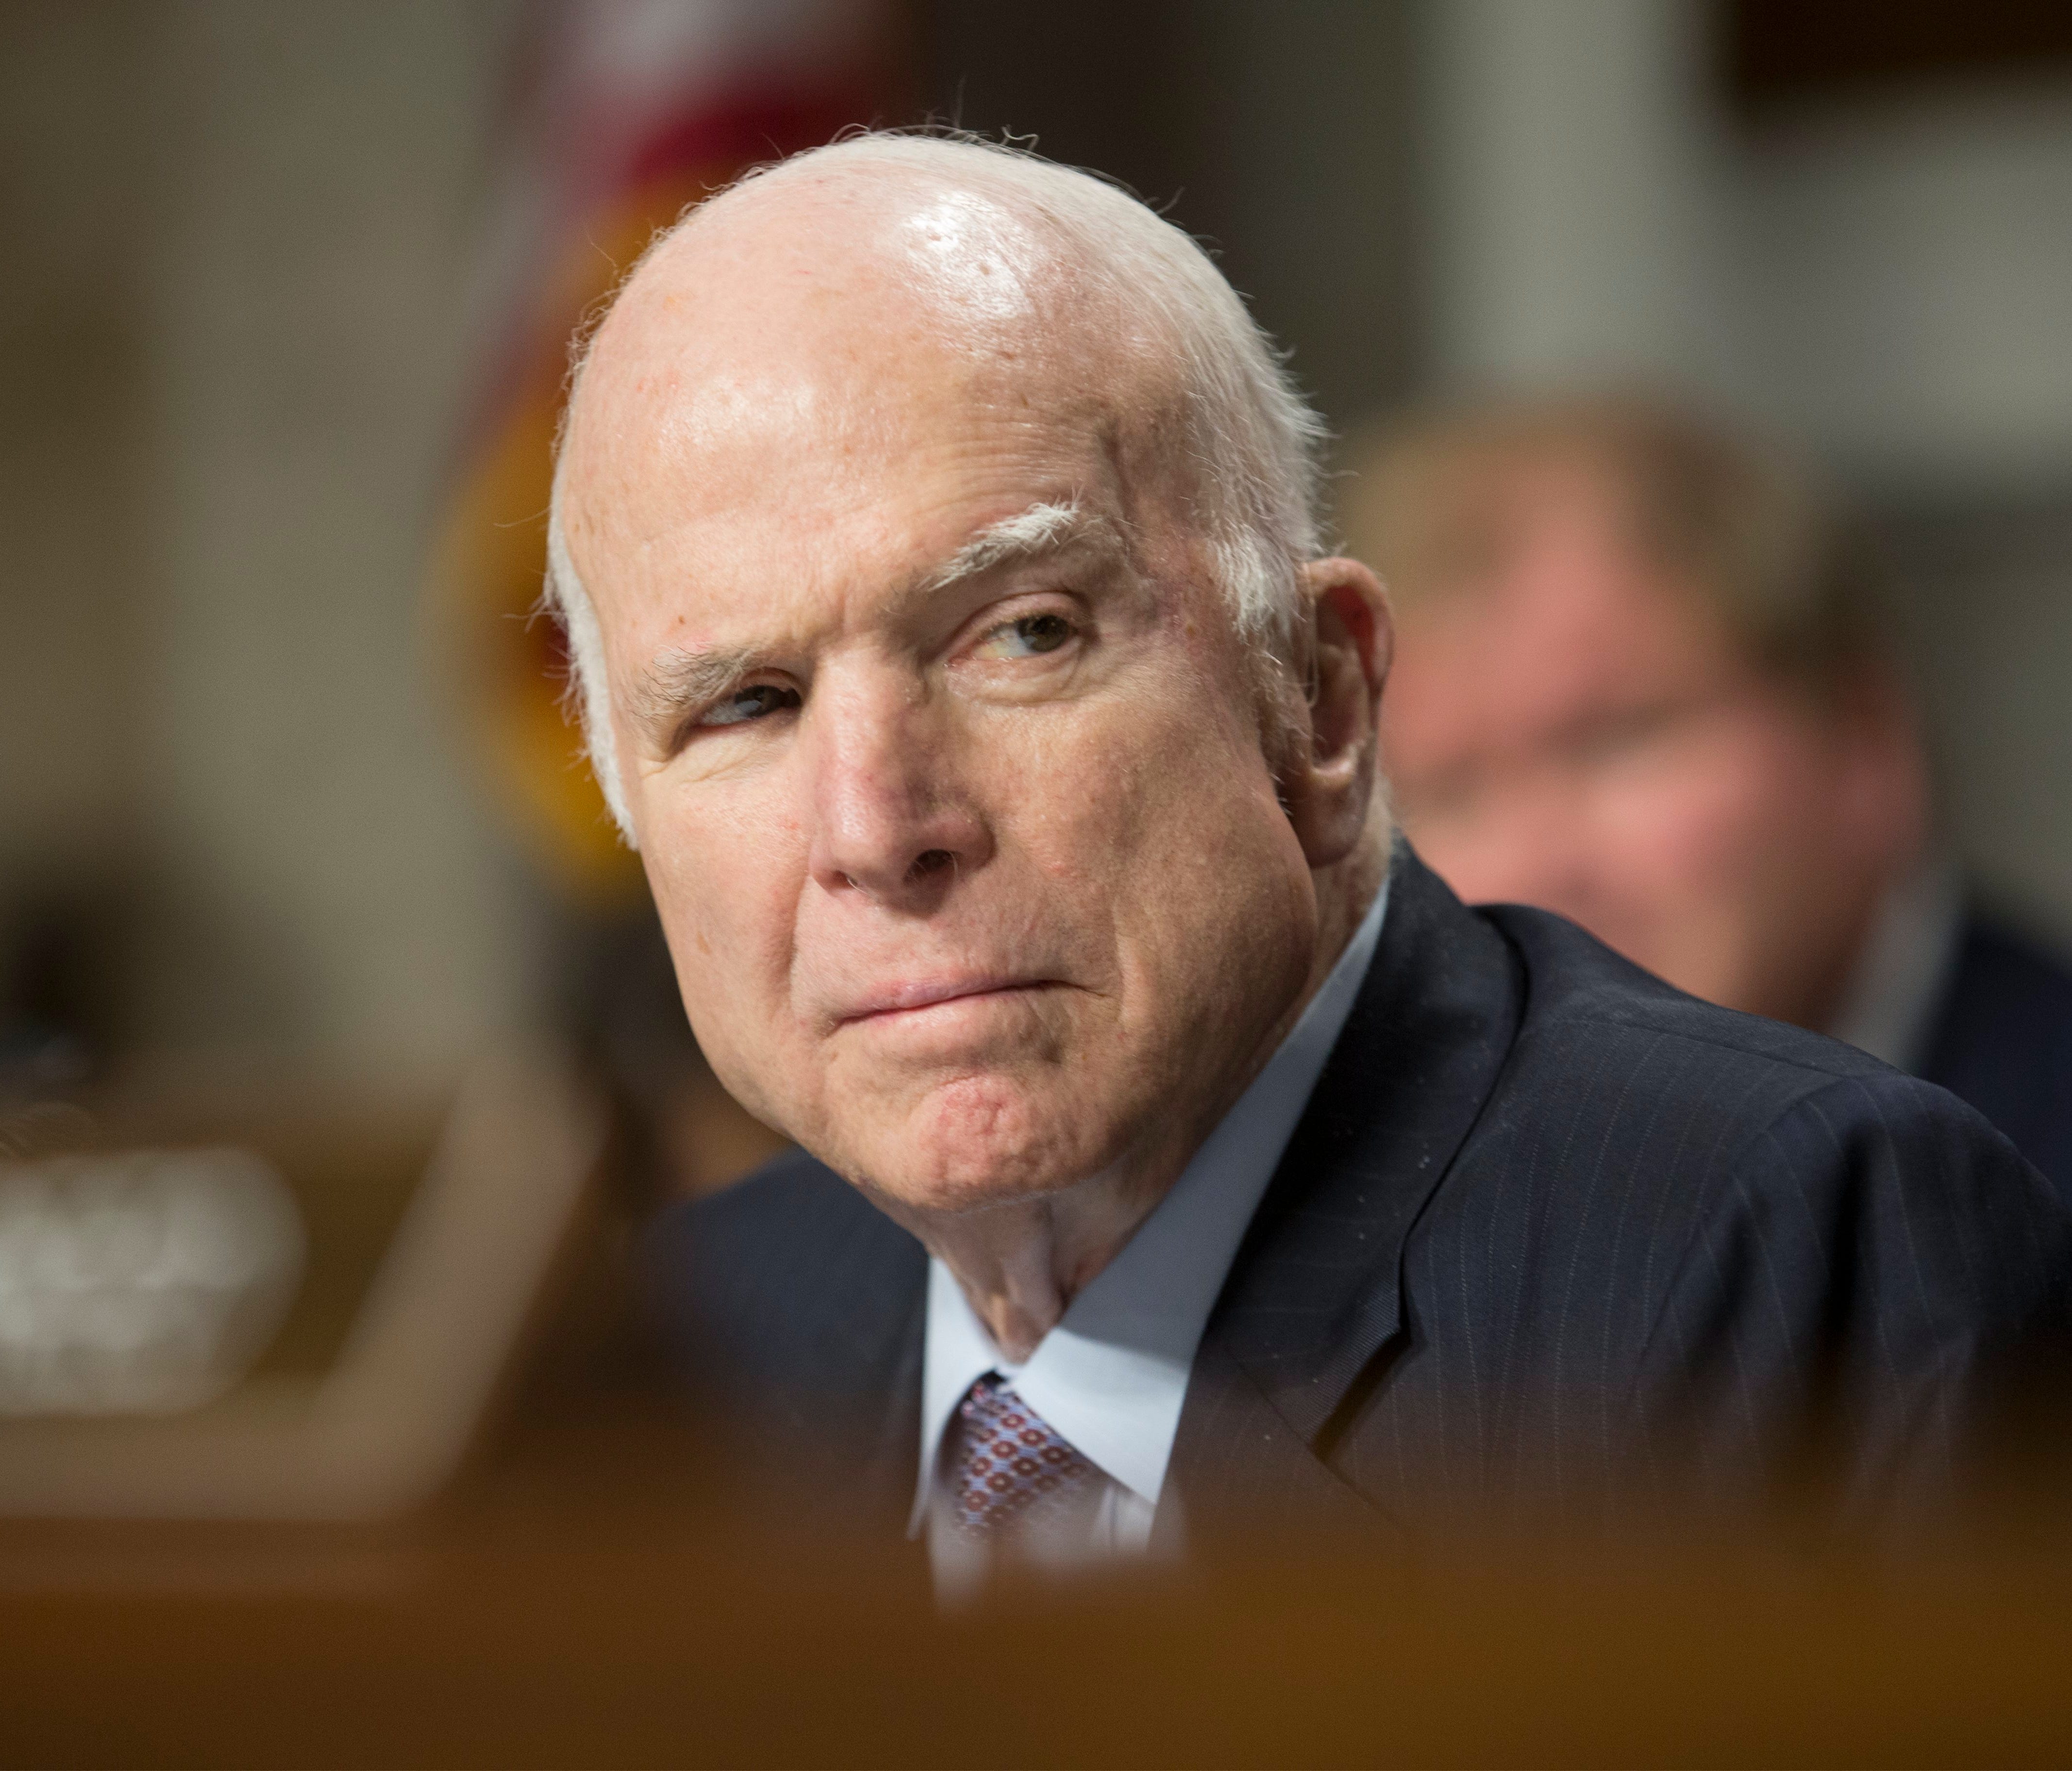 Chairman of the Senate Armed Services Committee, Sen. John McCain, R-Ariz., attends an Armed Services Committee hearing on Capitol Hill in Washington, Nov. 30 2017.